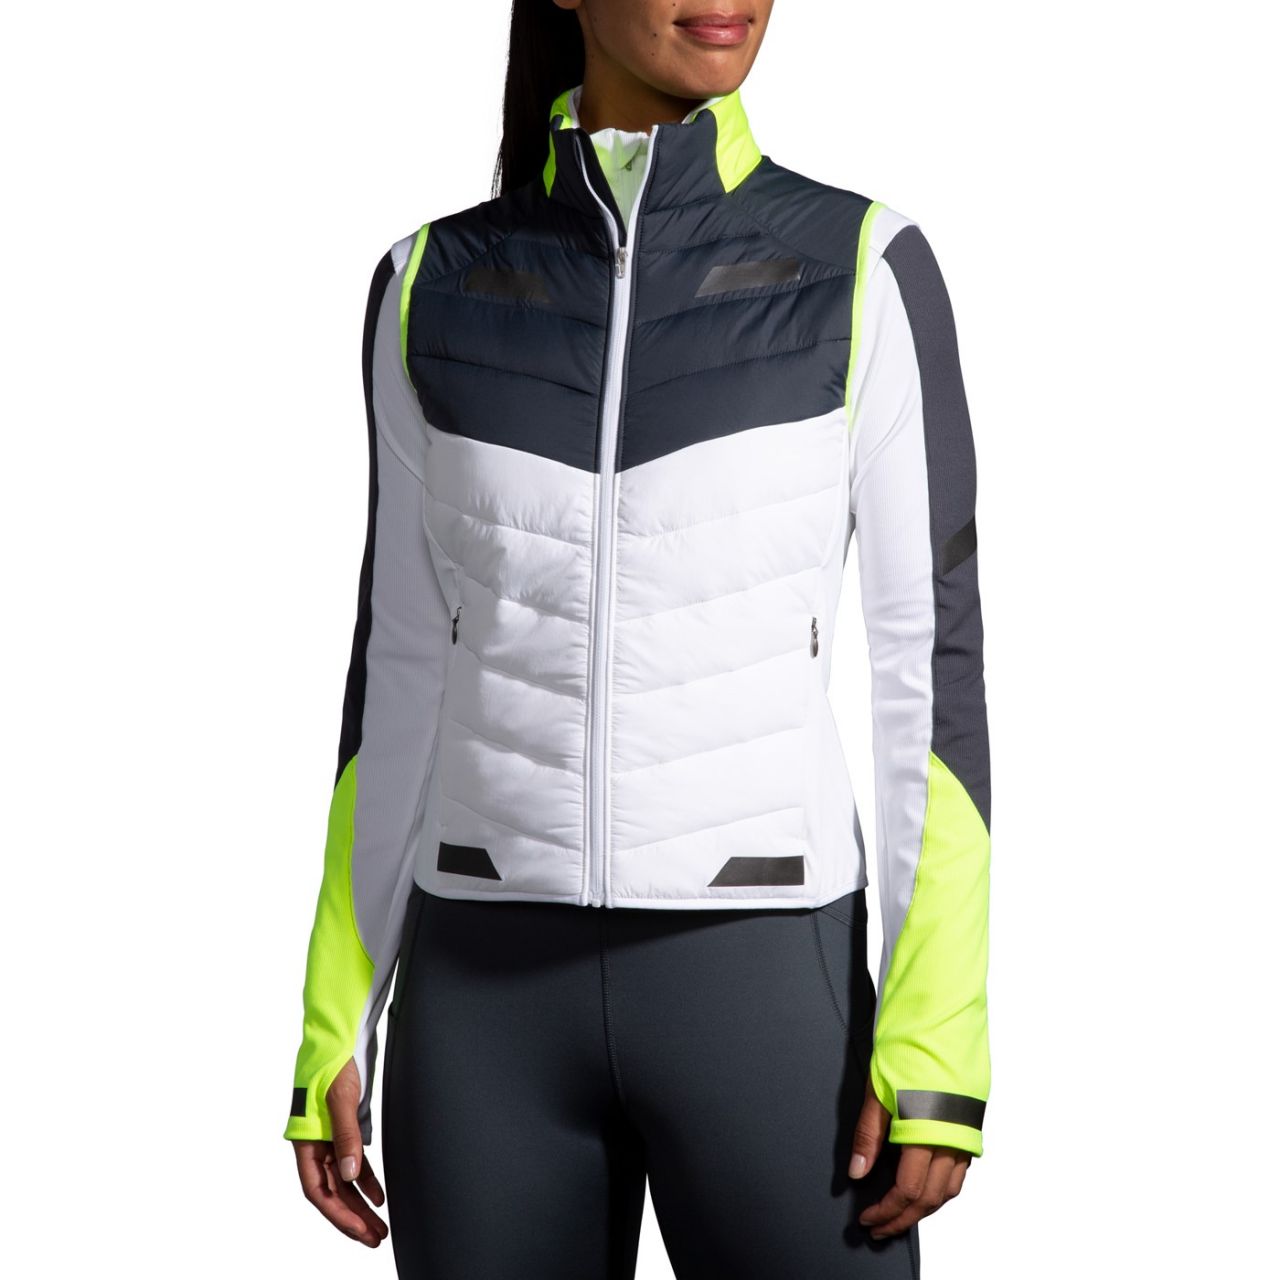 BROOKS RUN VISIBLE INSULATED VEST Veste running visible